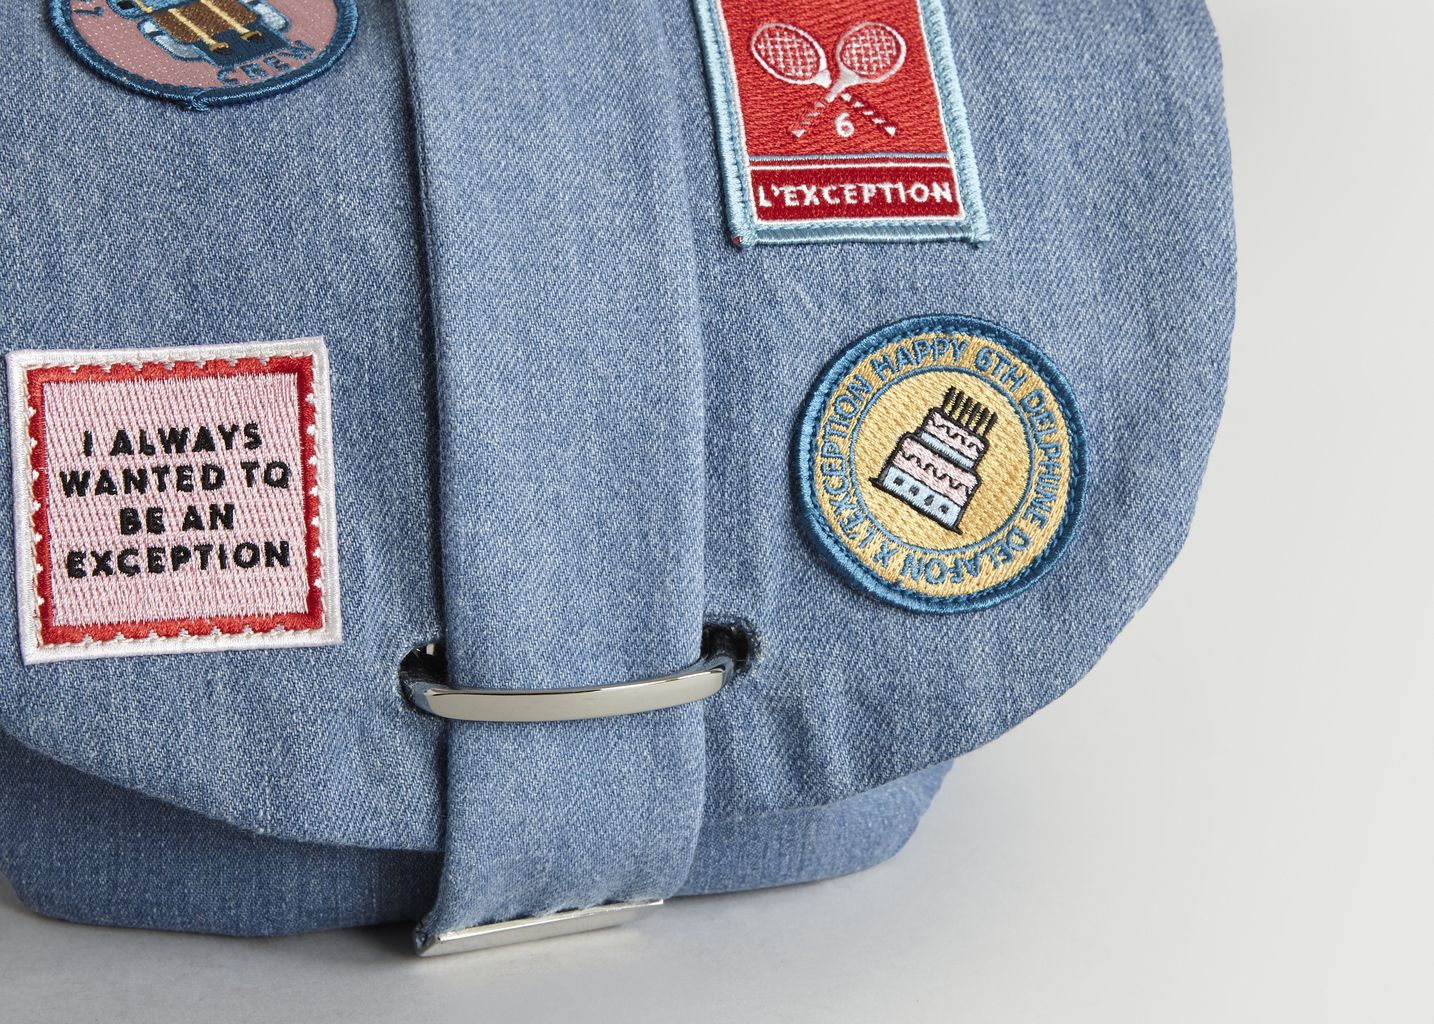 Bagpack Crew Patch - L'Exception